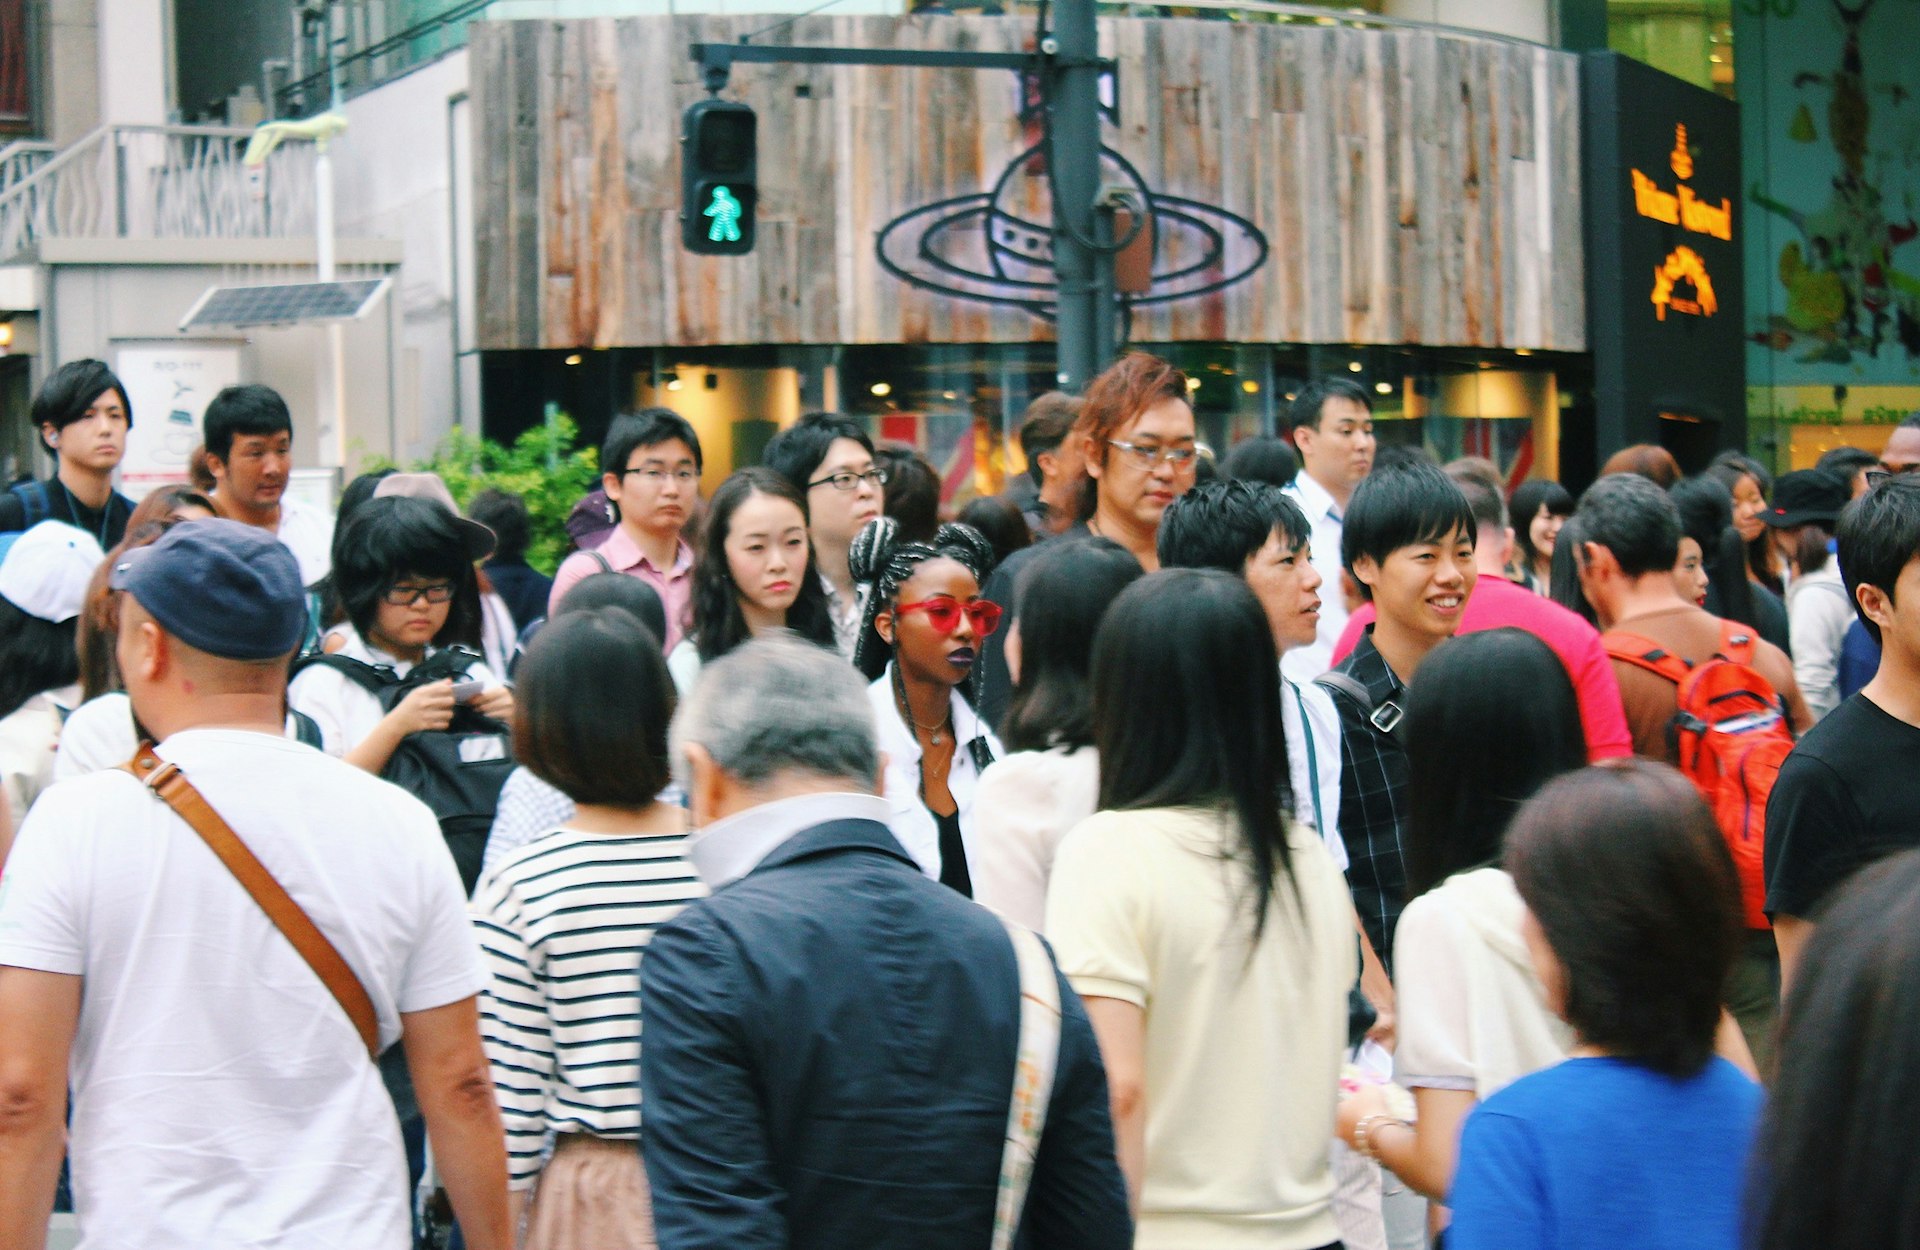 What it’s like to live as a black person in Japan